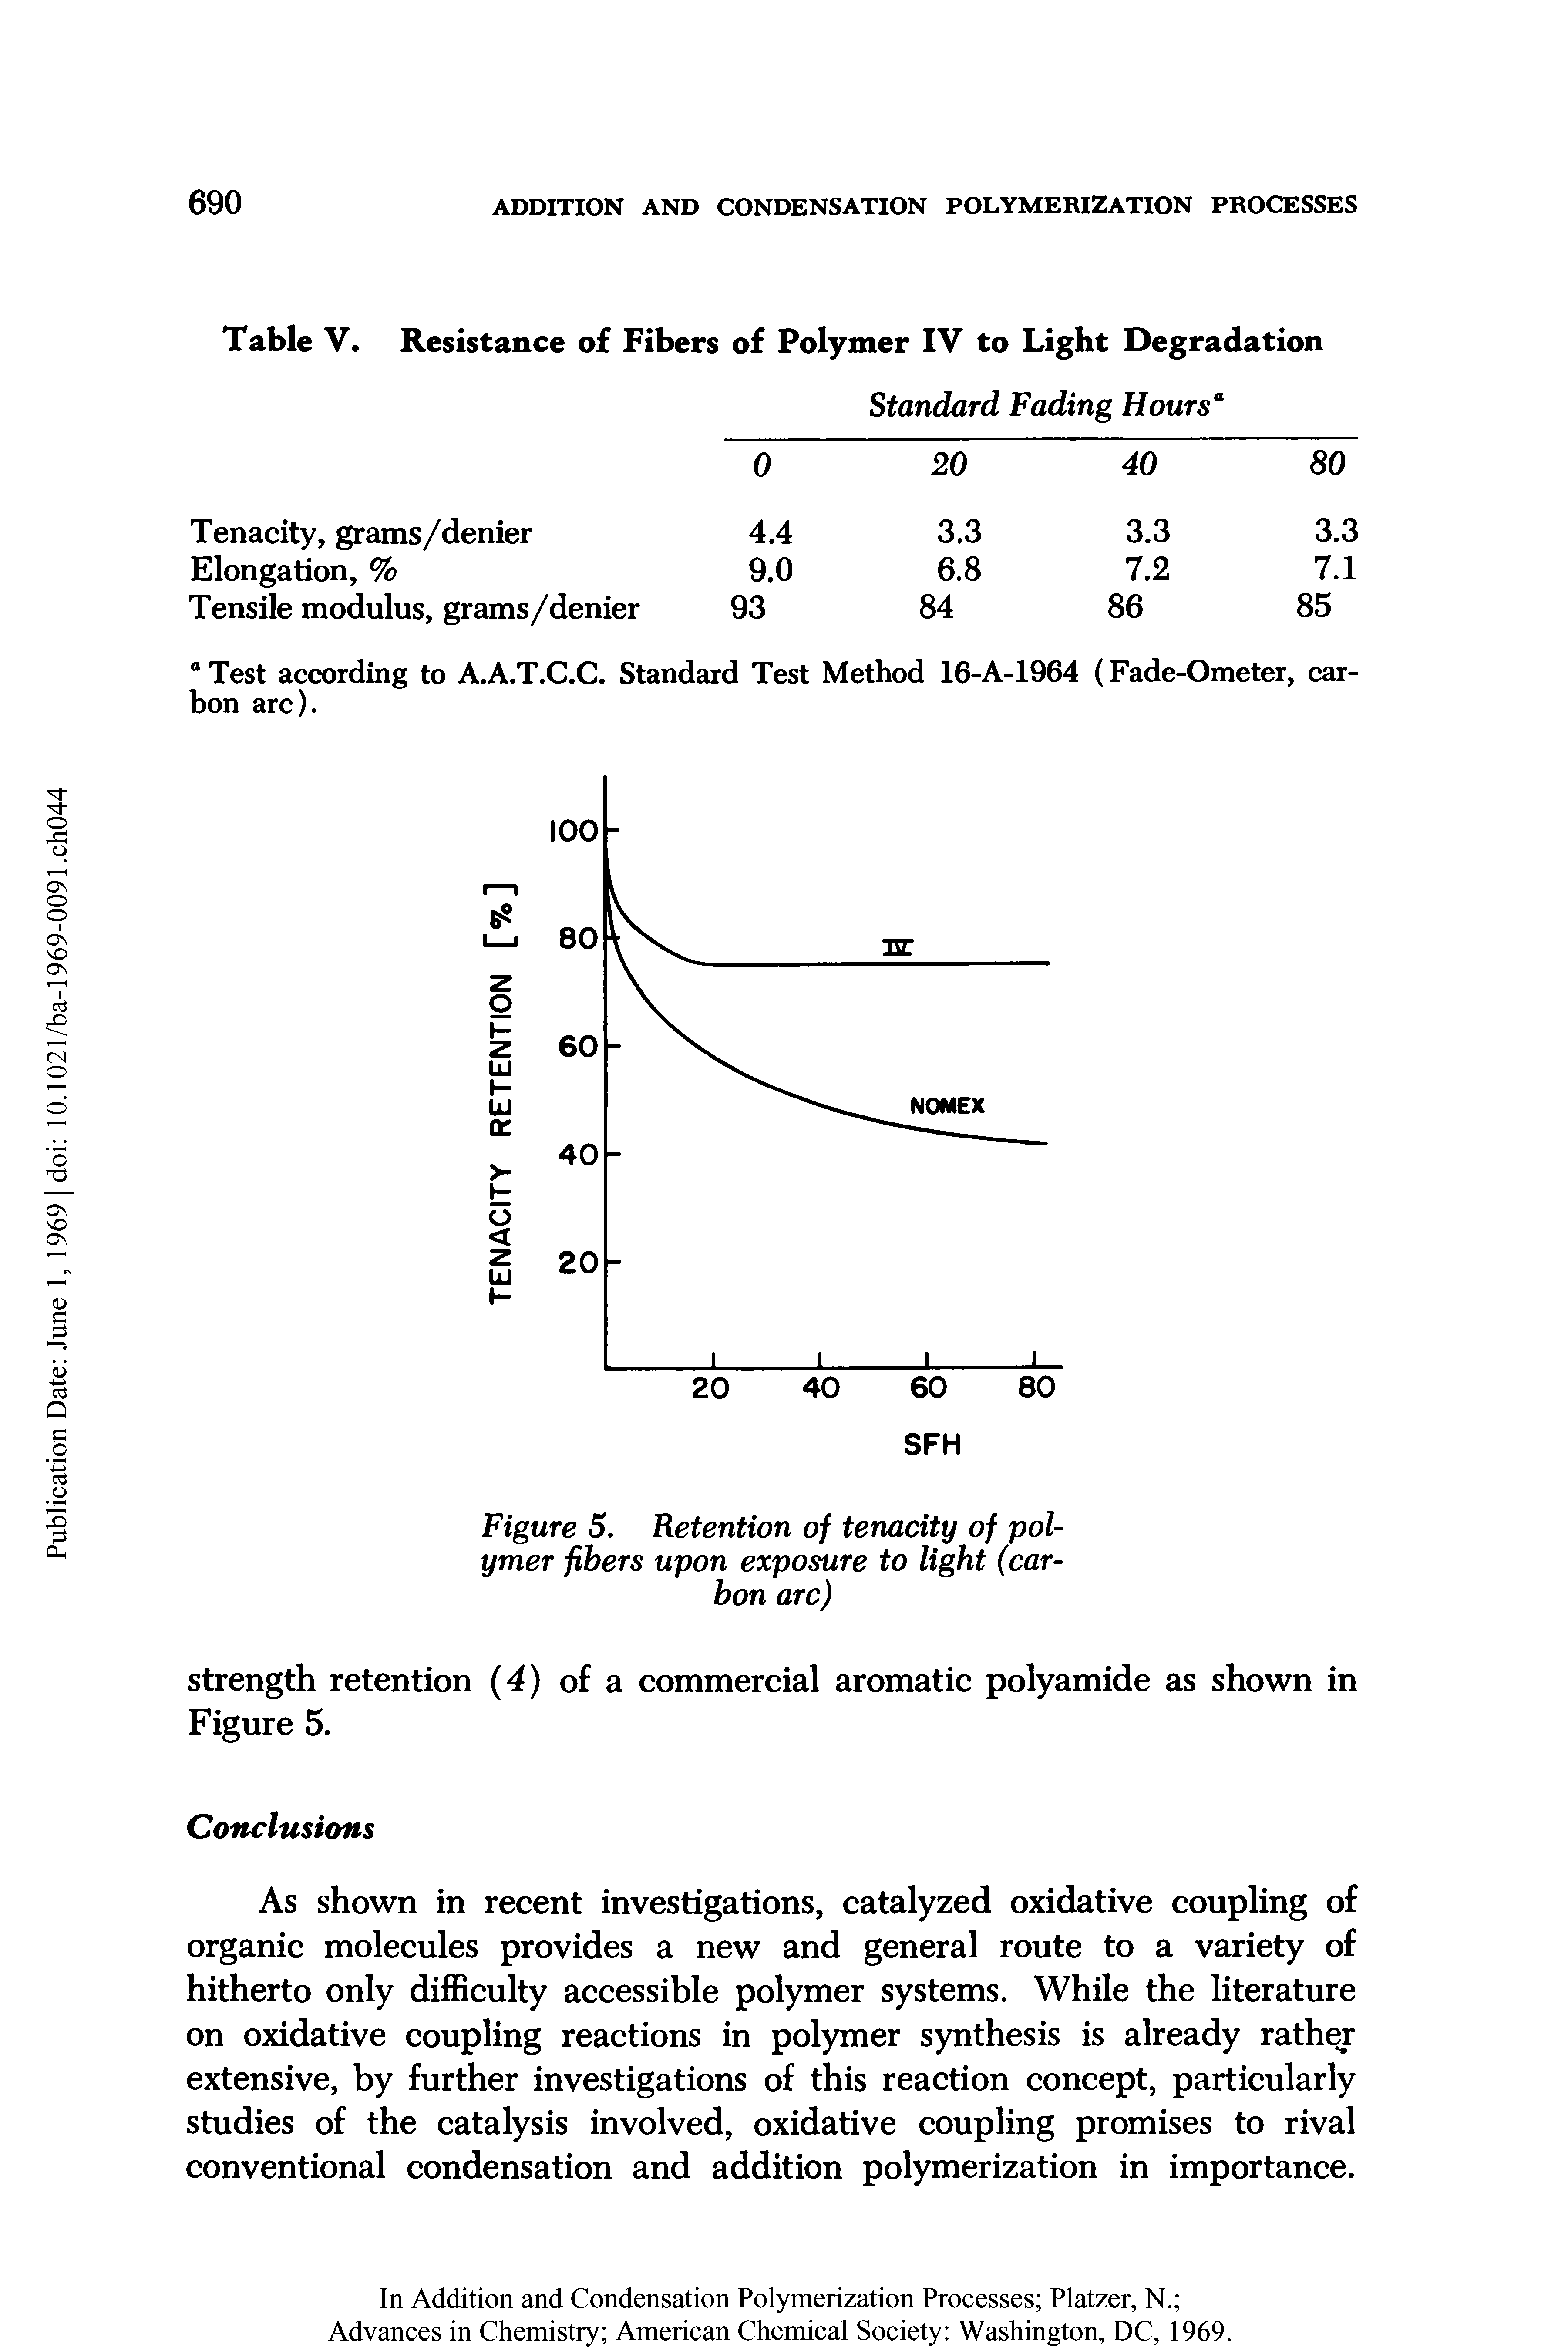 Table V. Resistance of Fibers of Polymer IV to Light Degradation...